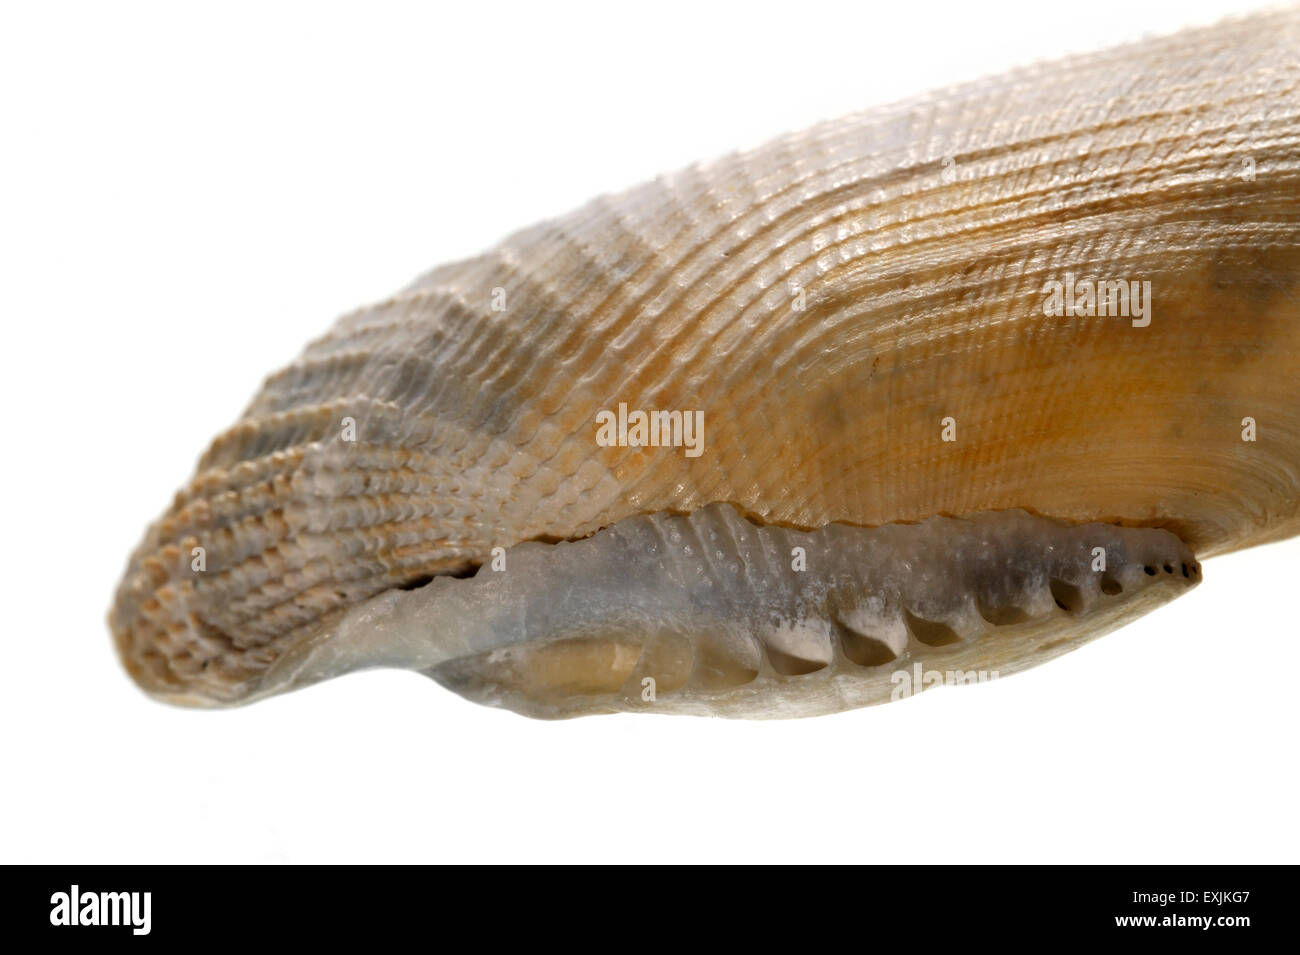 Common piddock (Pholas dactylus) close up showing the rolled-out hinge area Stock Photo